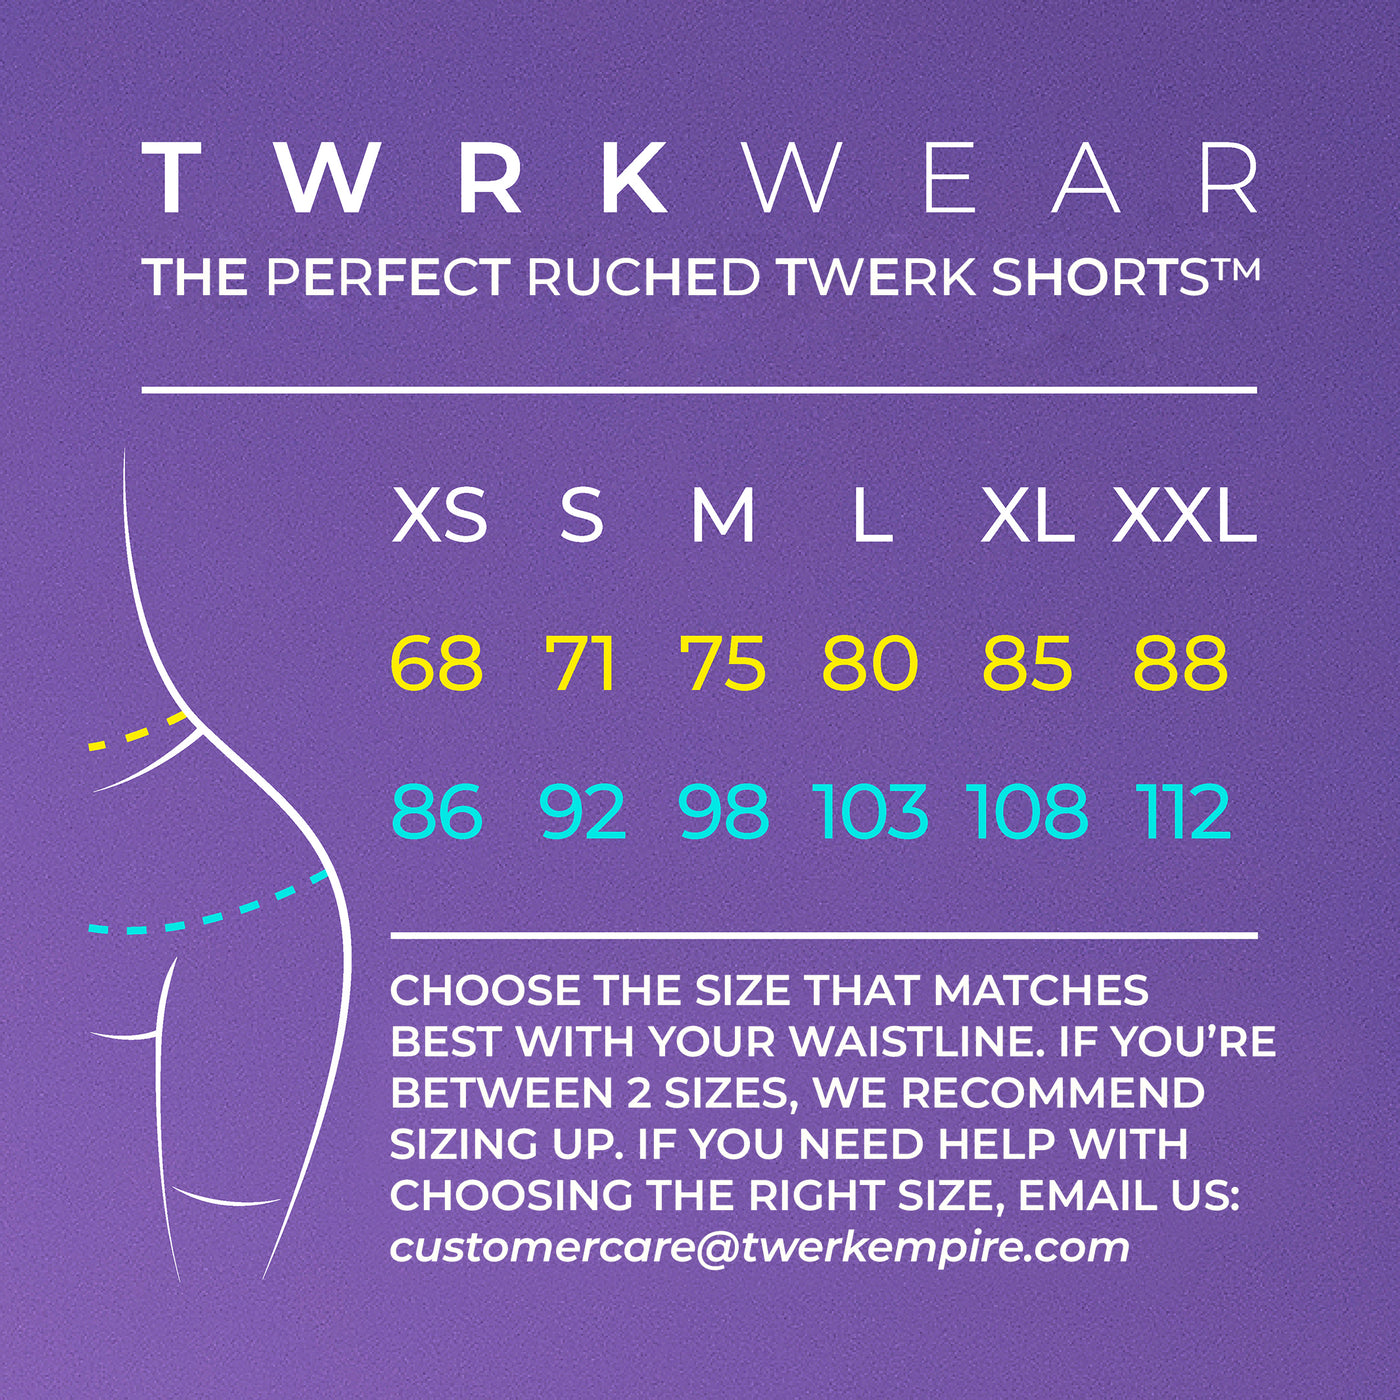 TWRKWEAR The Perfect Ruched Twerk Shorts™ – Exclusive Collection by Finnish Peaches: INFINITE FLOWERS